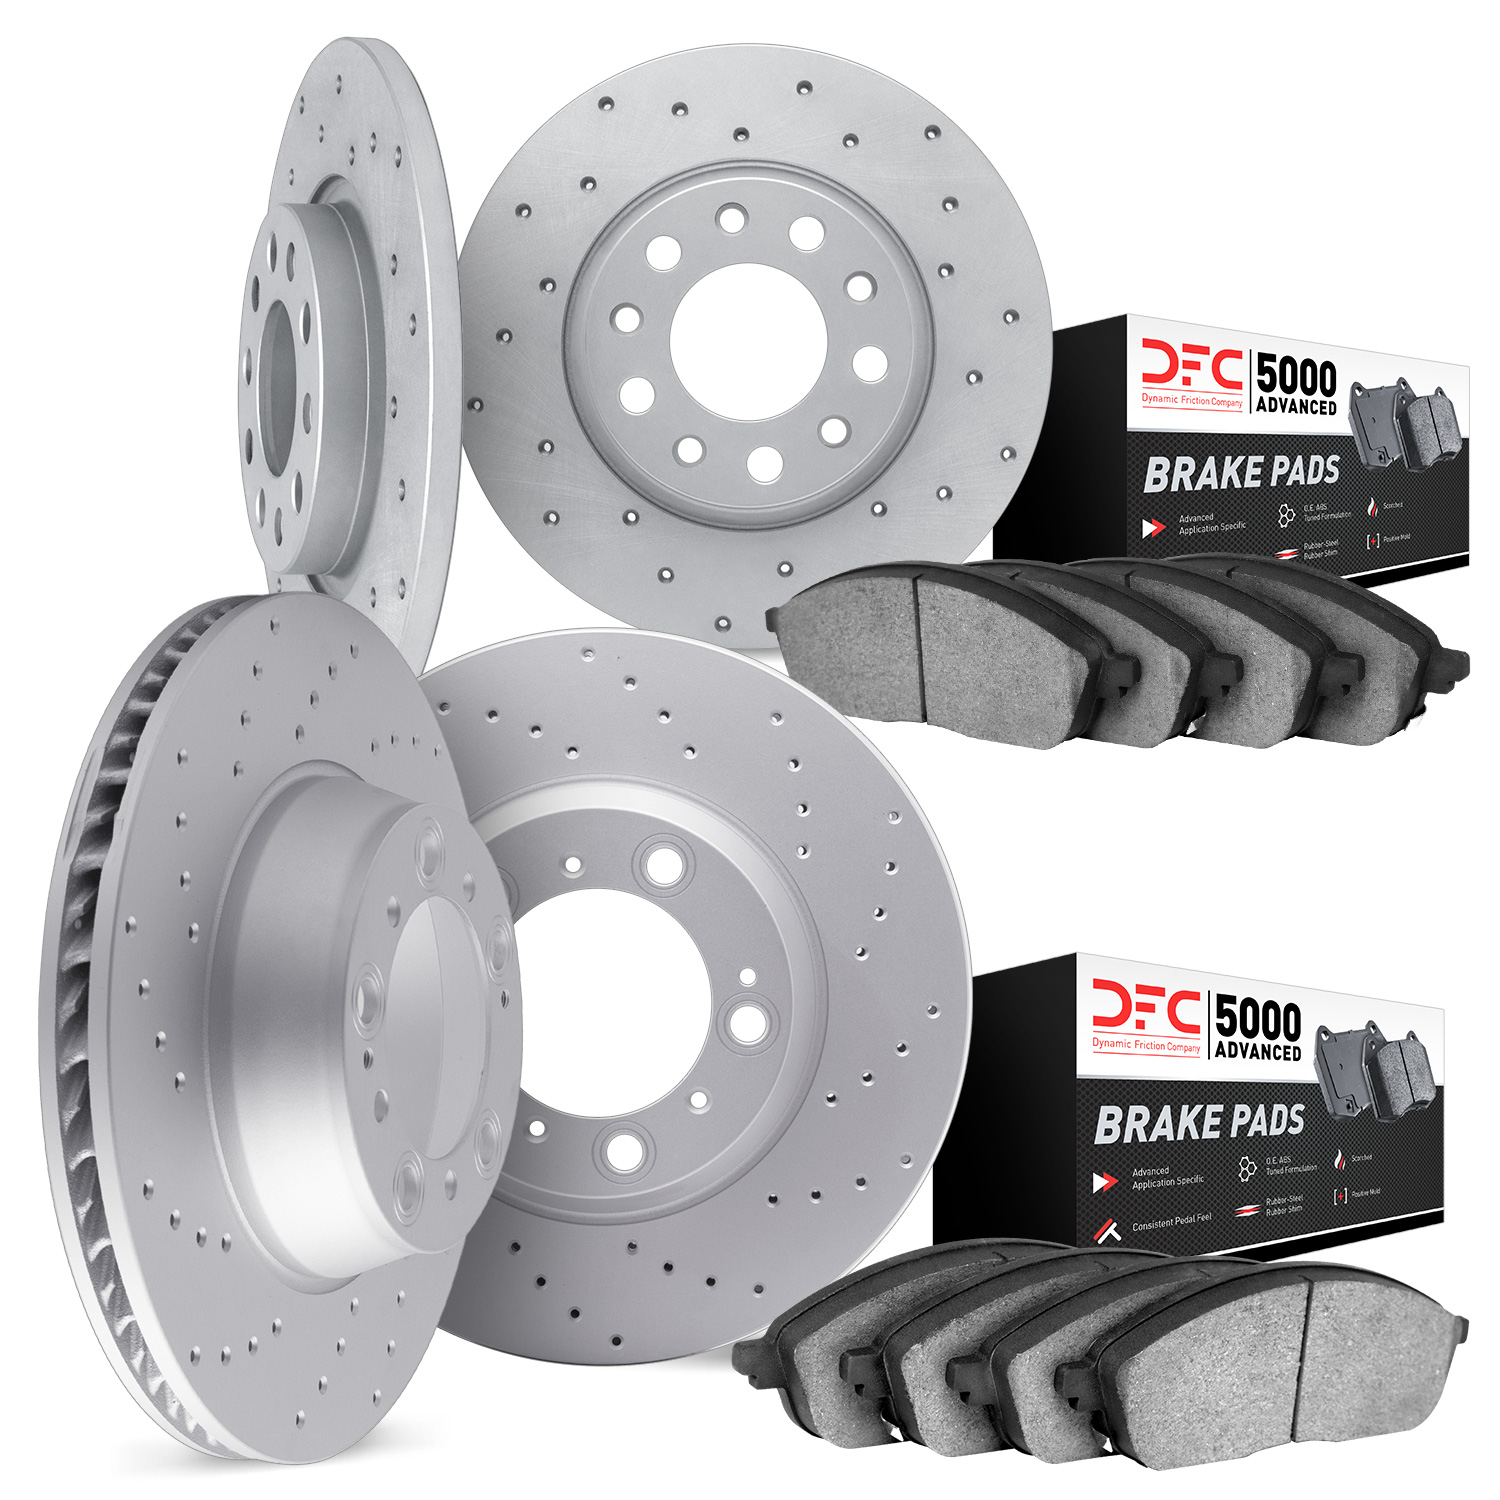 2704-54024 Geoperformance Drilled Brake Rotors with Active Performance Pads Kit, 2006-2015 Ford/Lincoln/Mercury/Mazda, Position: